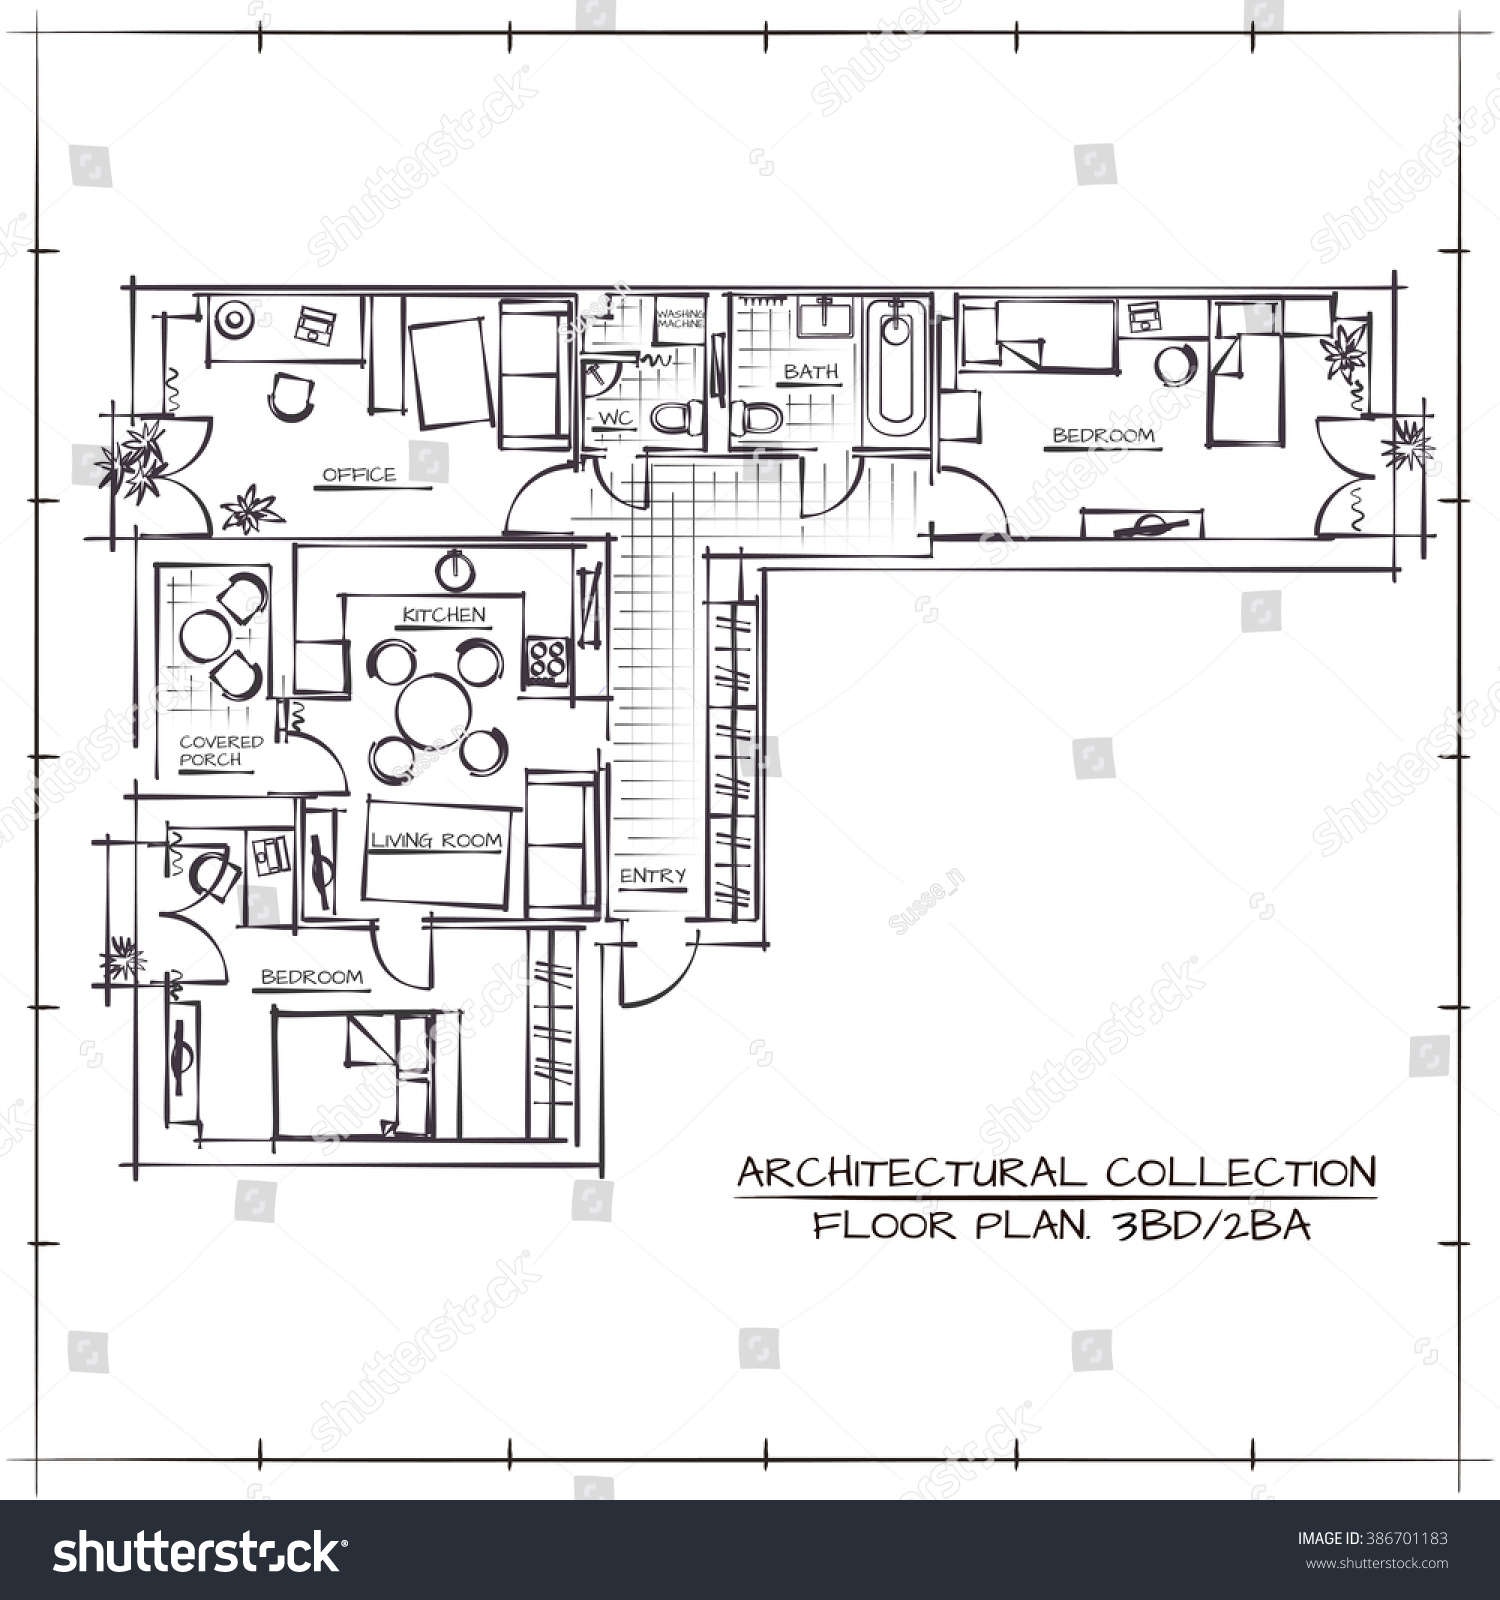 Architectural Hand Drawn Floor Planthree Bedrooms Stock Vector